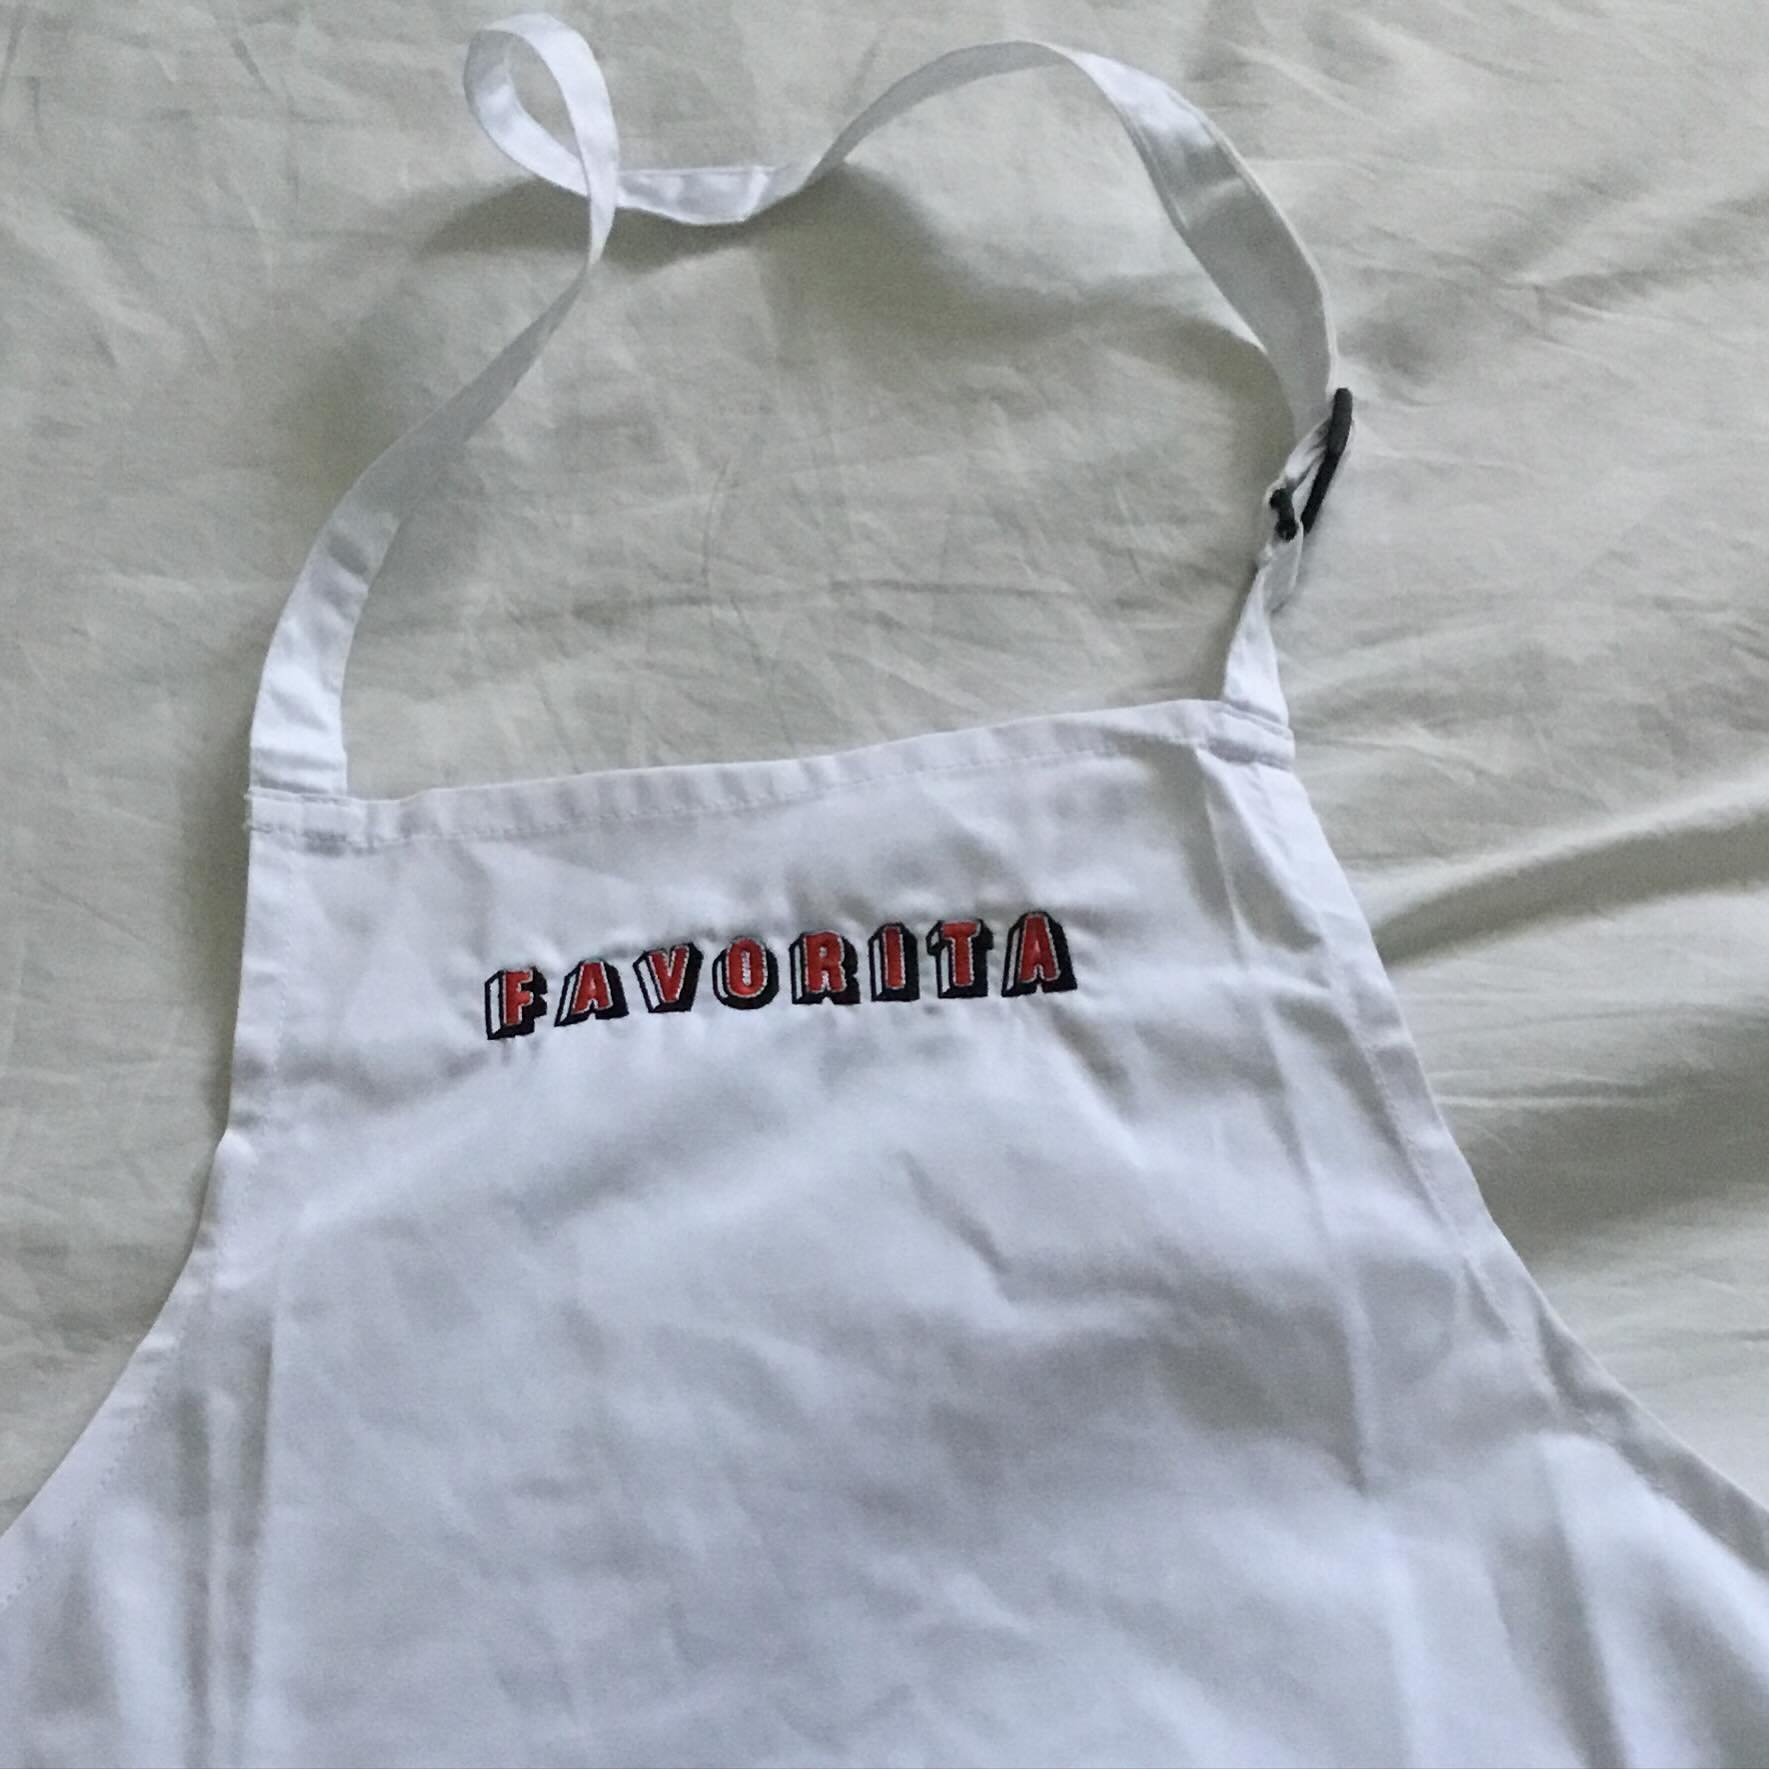 Aprons have arrived ready for our next cookery holidays coming up! Must call my mother to ask how she keeps her whites so white!